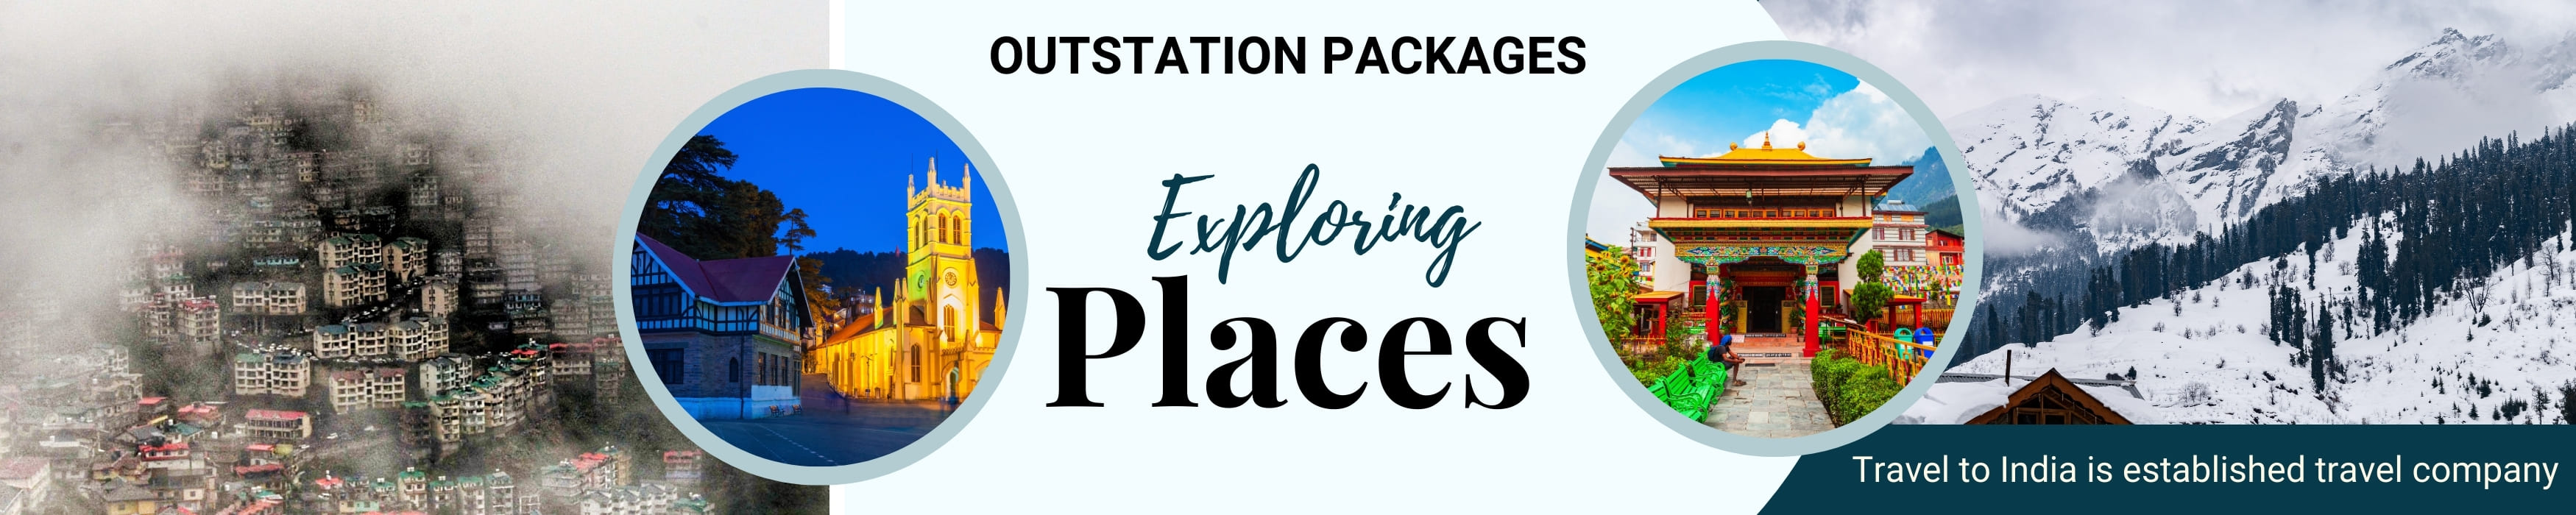 OutStation Packages